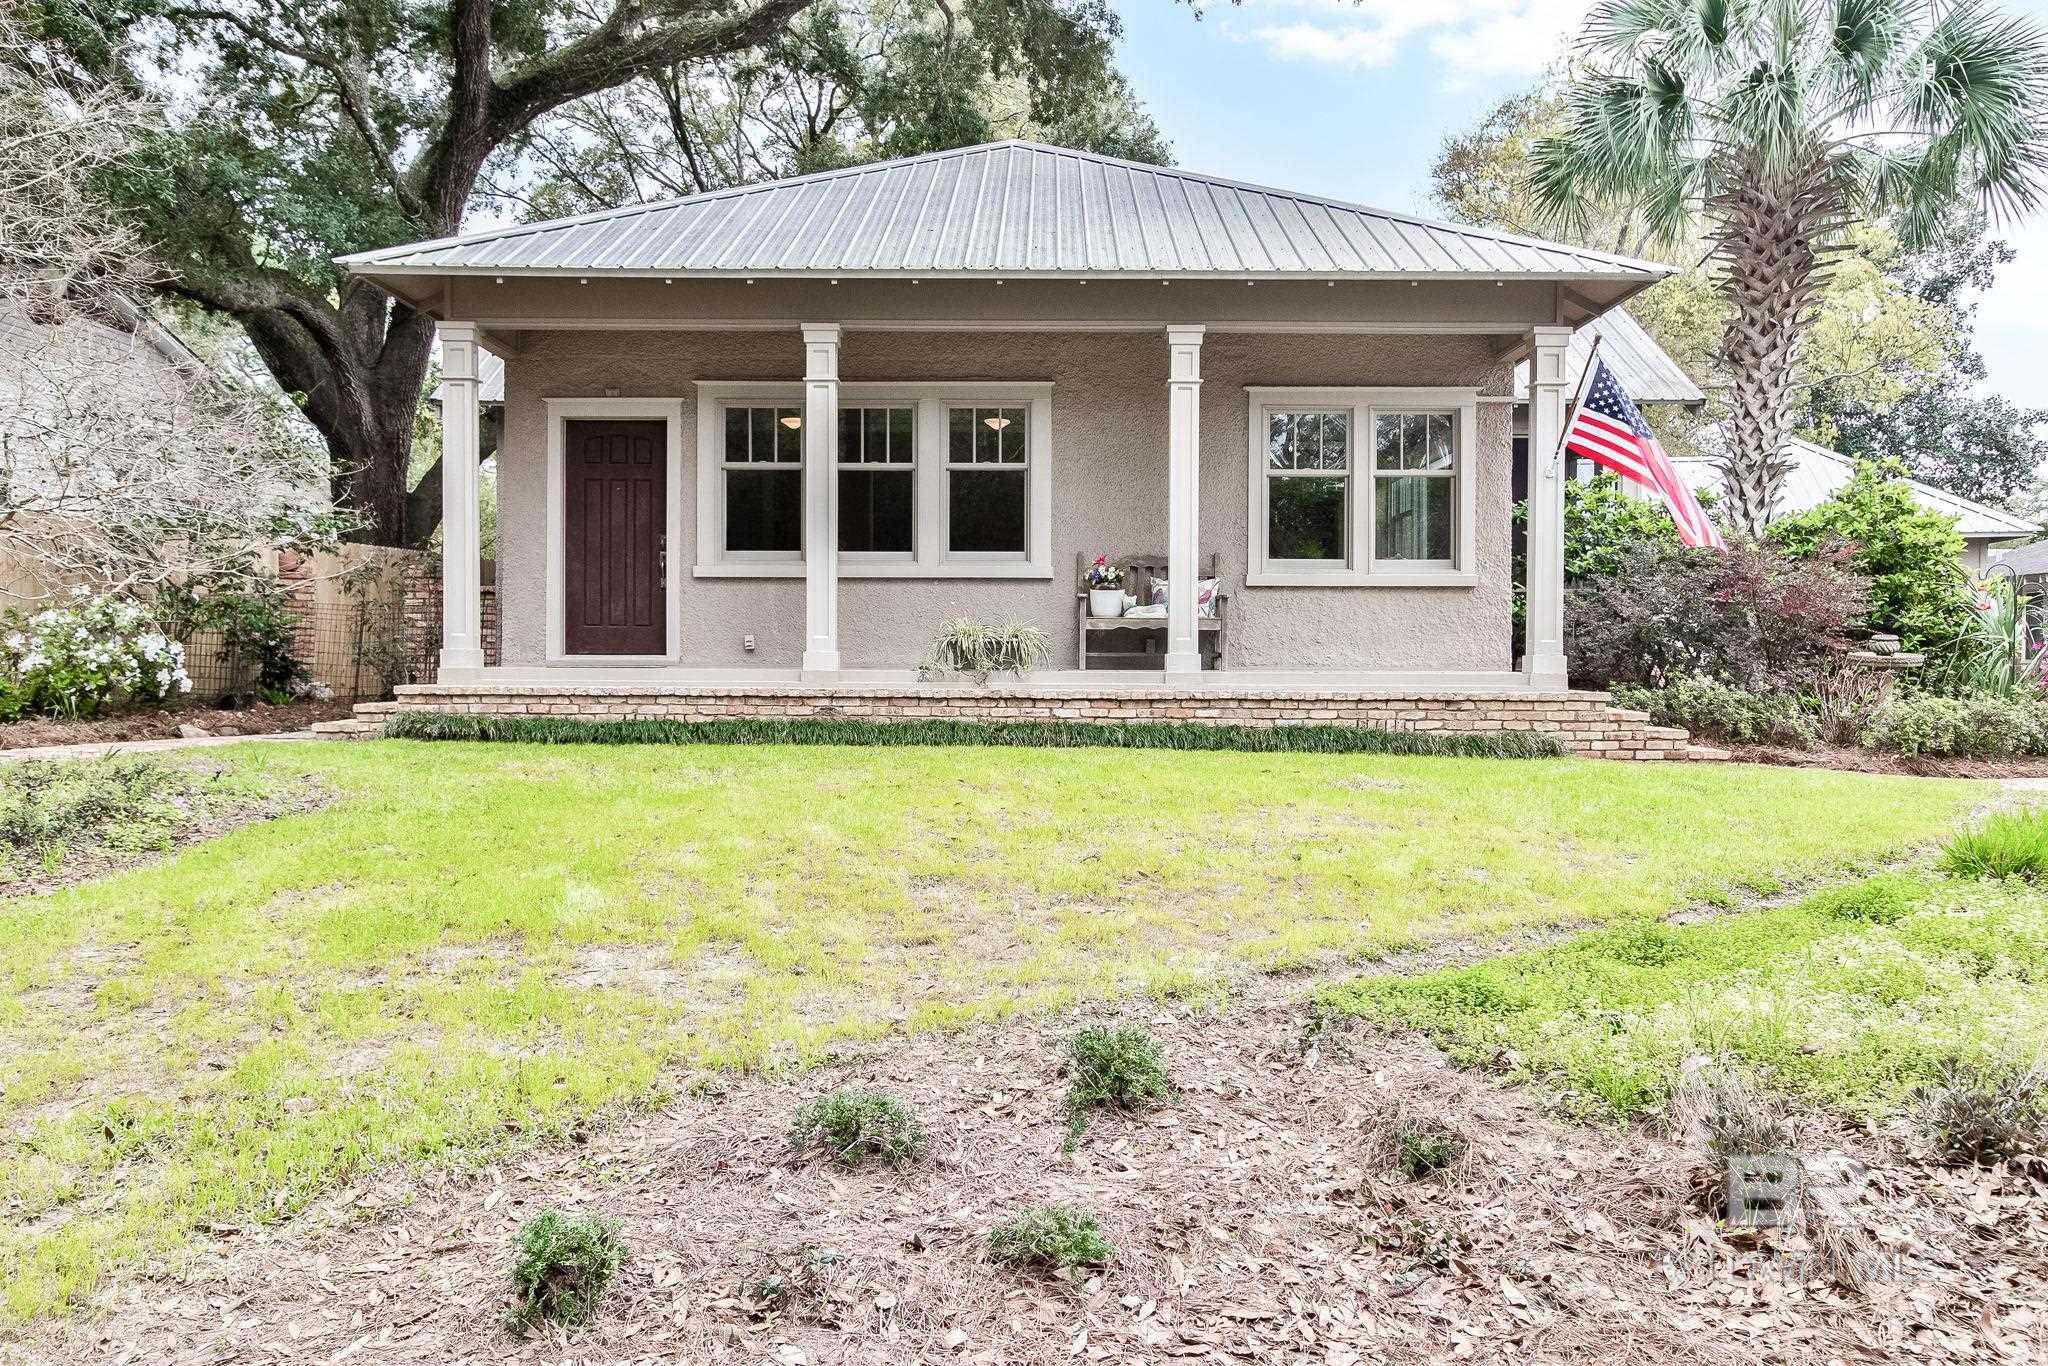 This Historic Fairhope Cottage is located just a short walking distance to Downtown Fairhope, two neighborhood parks and the Beautiful Bay Front parks that are enticing people flock to this area! This home has 3 sizable bedrooms and 2 updated bathrooms with just under 1500 square feet of living space. There is also a 1 car garage/separate carriage house that was built in 2011 with a 14 x 15 workshop, that could be converted into a separate studio apartment, and a 12x 8 tool closet that combined has close to 670 square feet usable space. The finishes are very inviting with Beautiful Pine floors throughout, tall ceilings in every room, custom built in shelving, wood accented walls, craftsman trim, a metal roof installed in 2005, and also all of the windows have been updated with Anderson 3 over 1 windows! Just off the kitchen you will love the enclosed Florida room with antique tongue and groove walls that opens into a 11 x 10 screened in porch. This property is exactly what you picture when you want to live in a downtown cottage, it has all of the character you have dreamed about when moving to Downtown Fairhope!